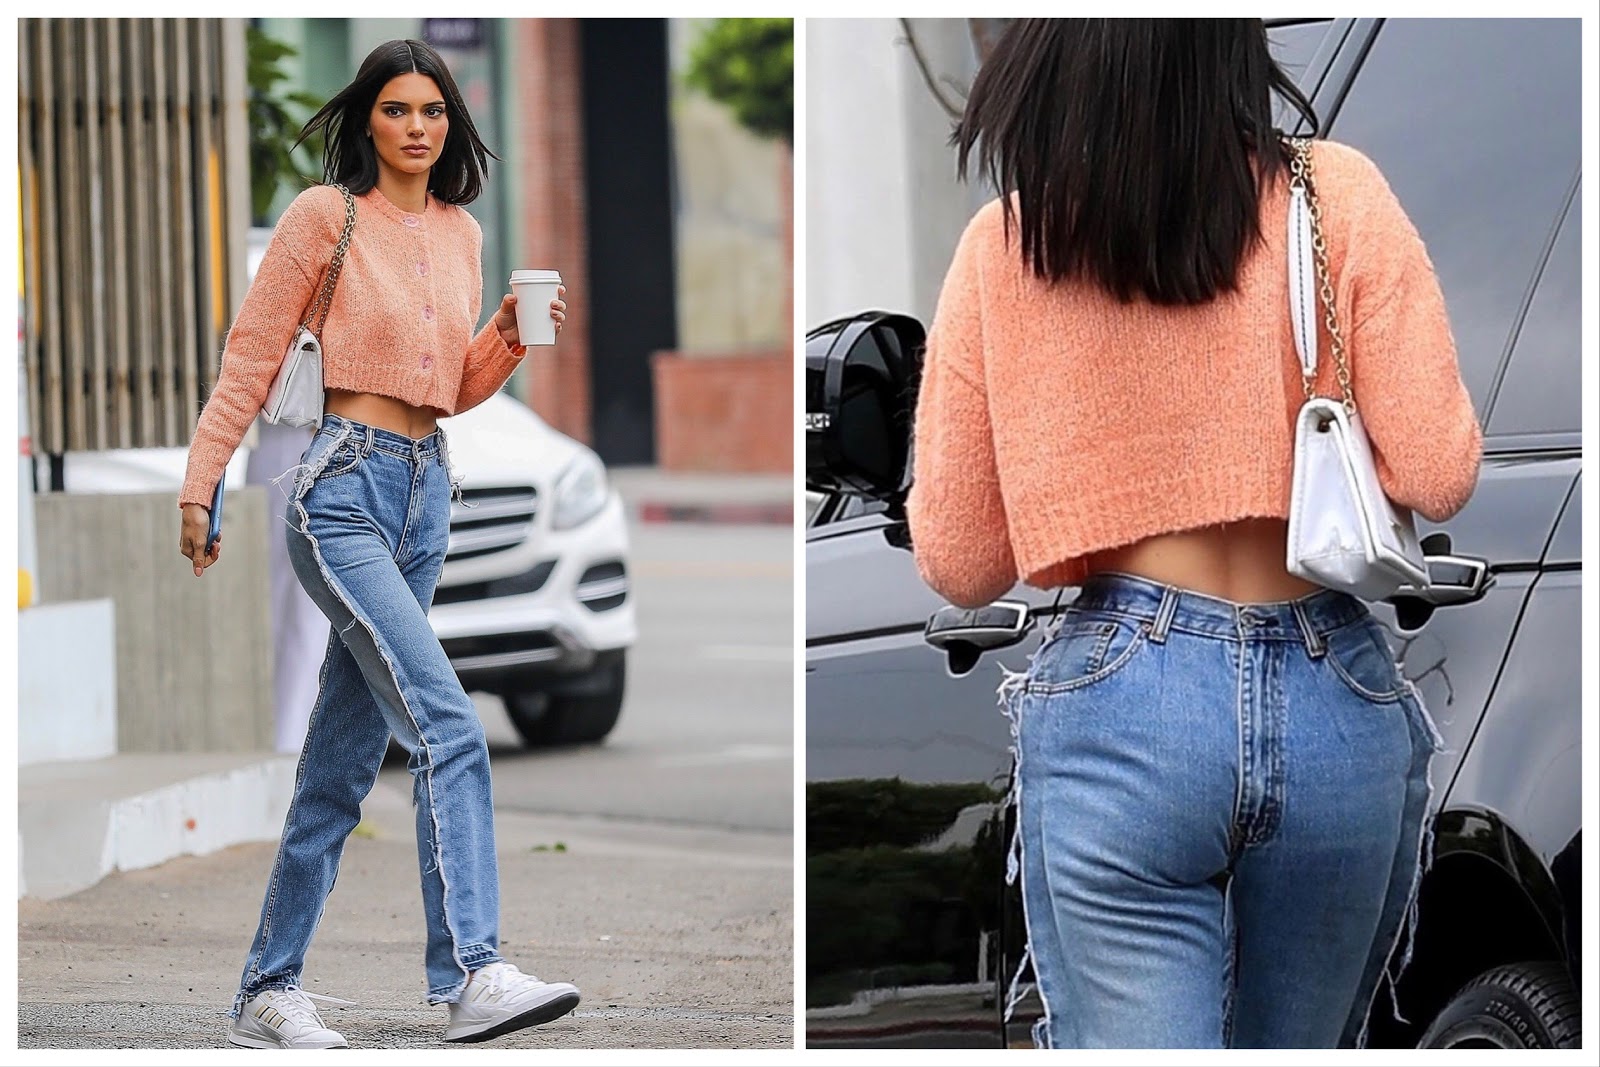 A fashion icon for many, Kendall Jenner. 